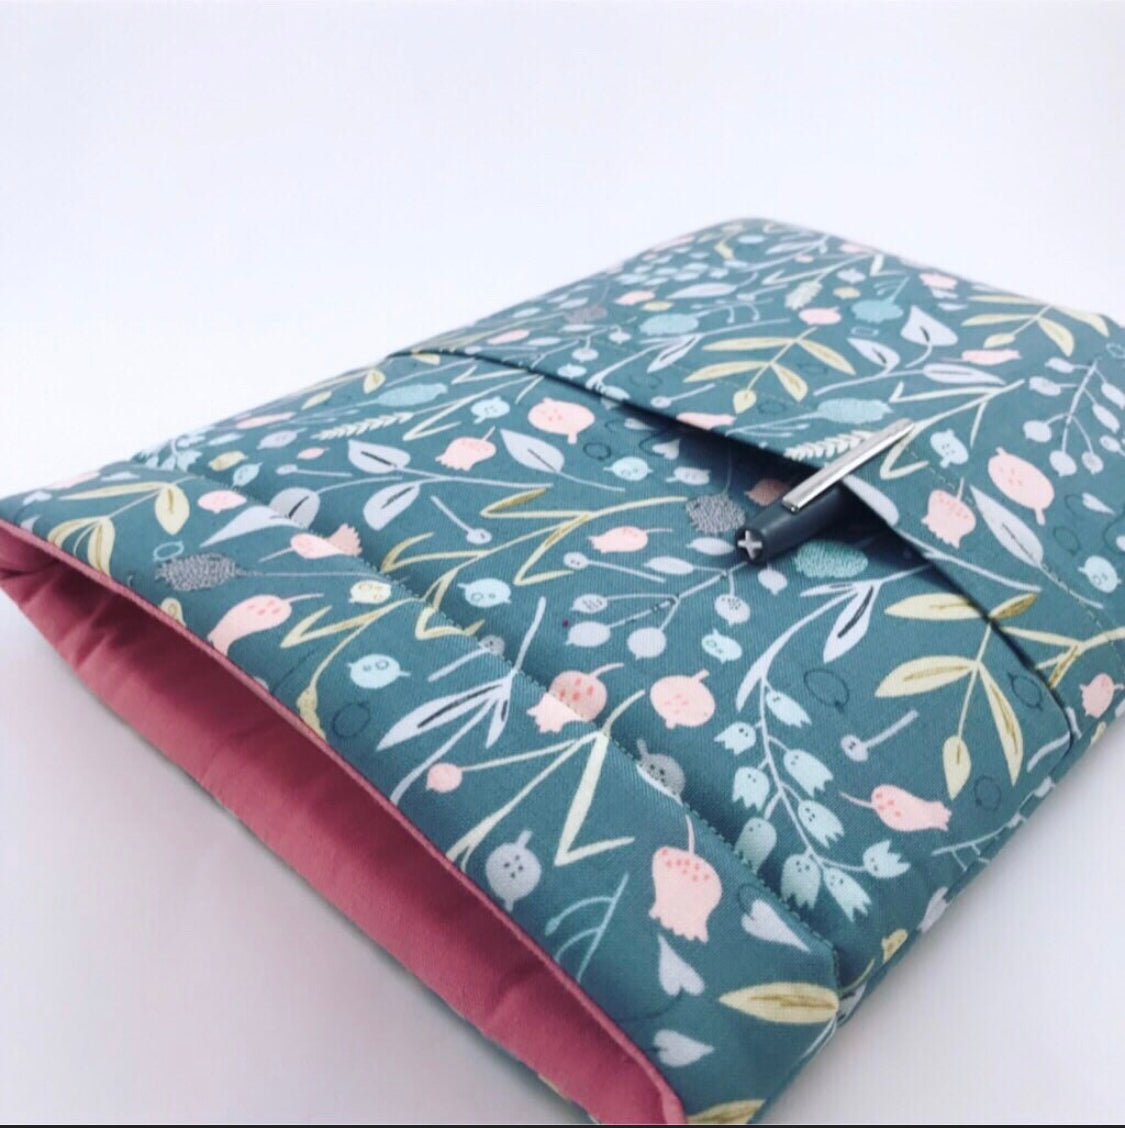 FLORAL DREAMS BOOKSLEEVE